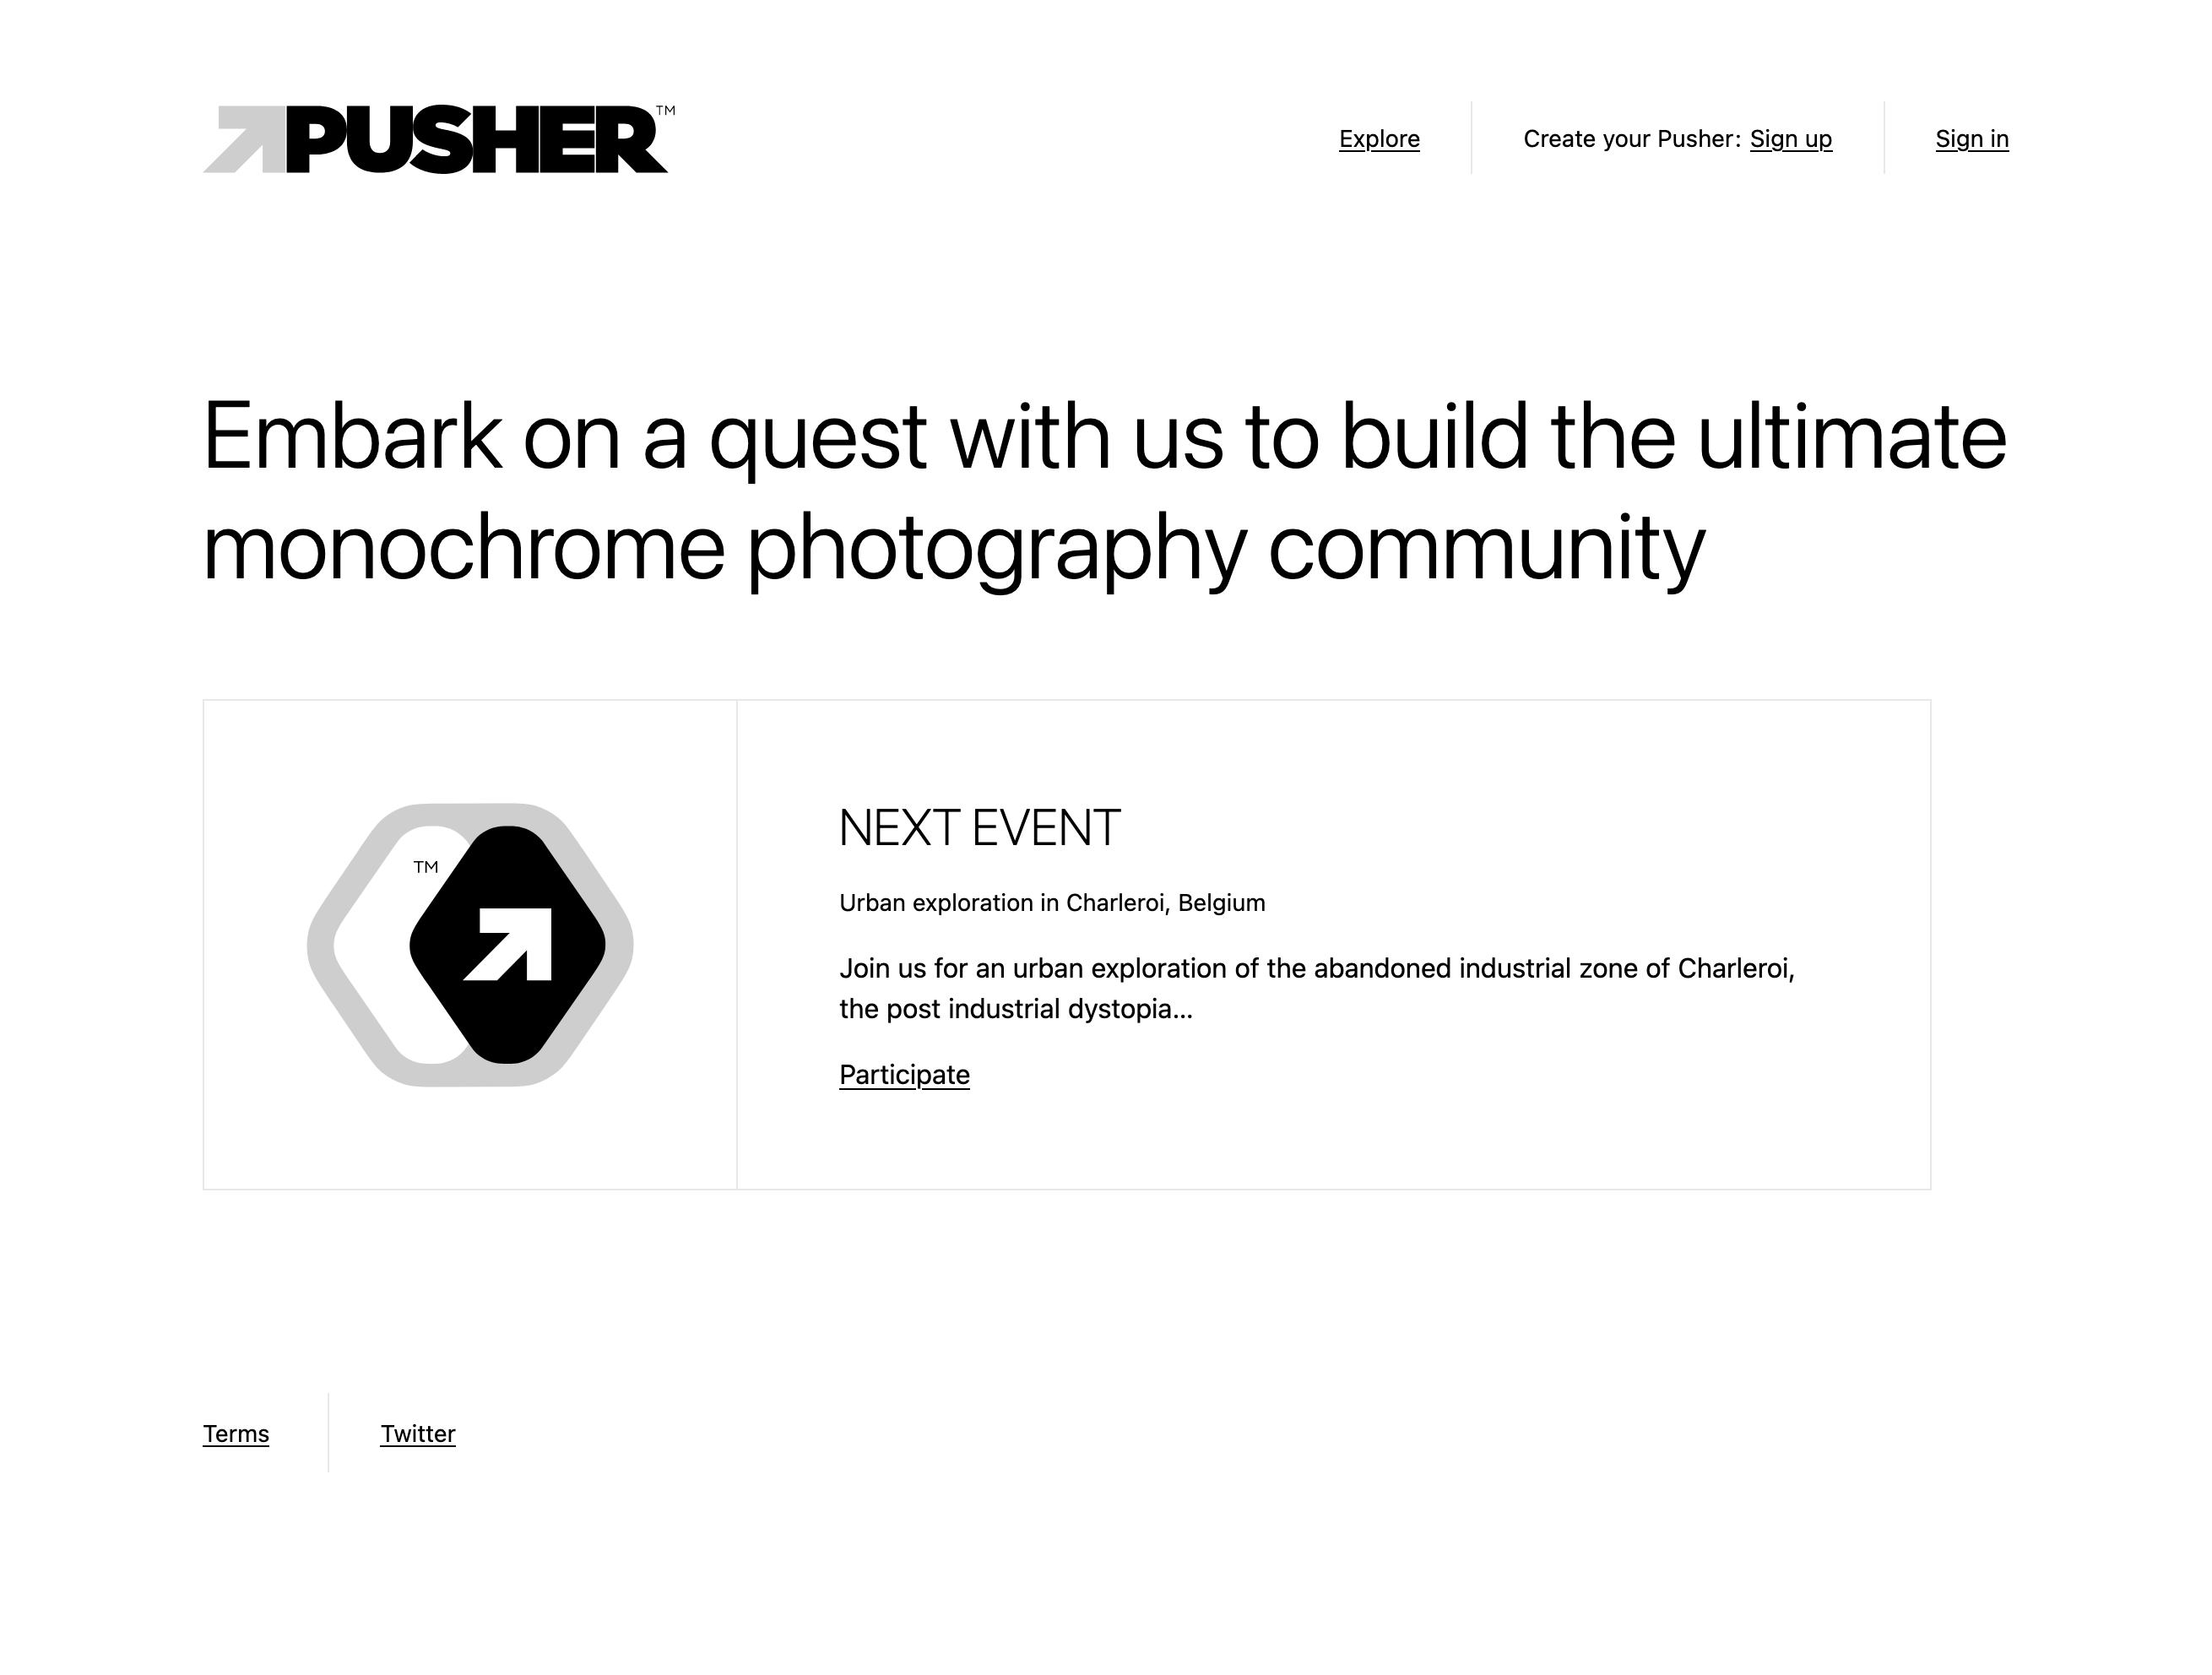 Welcome to Pusher